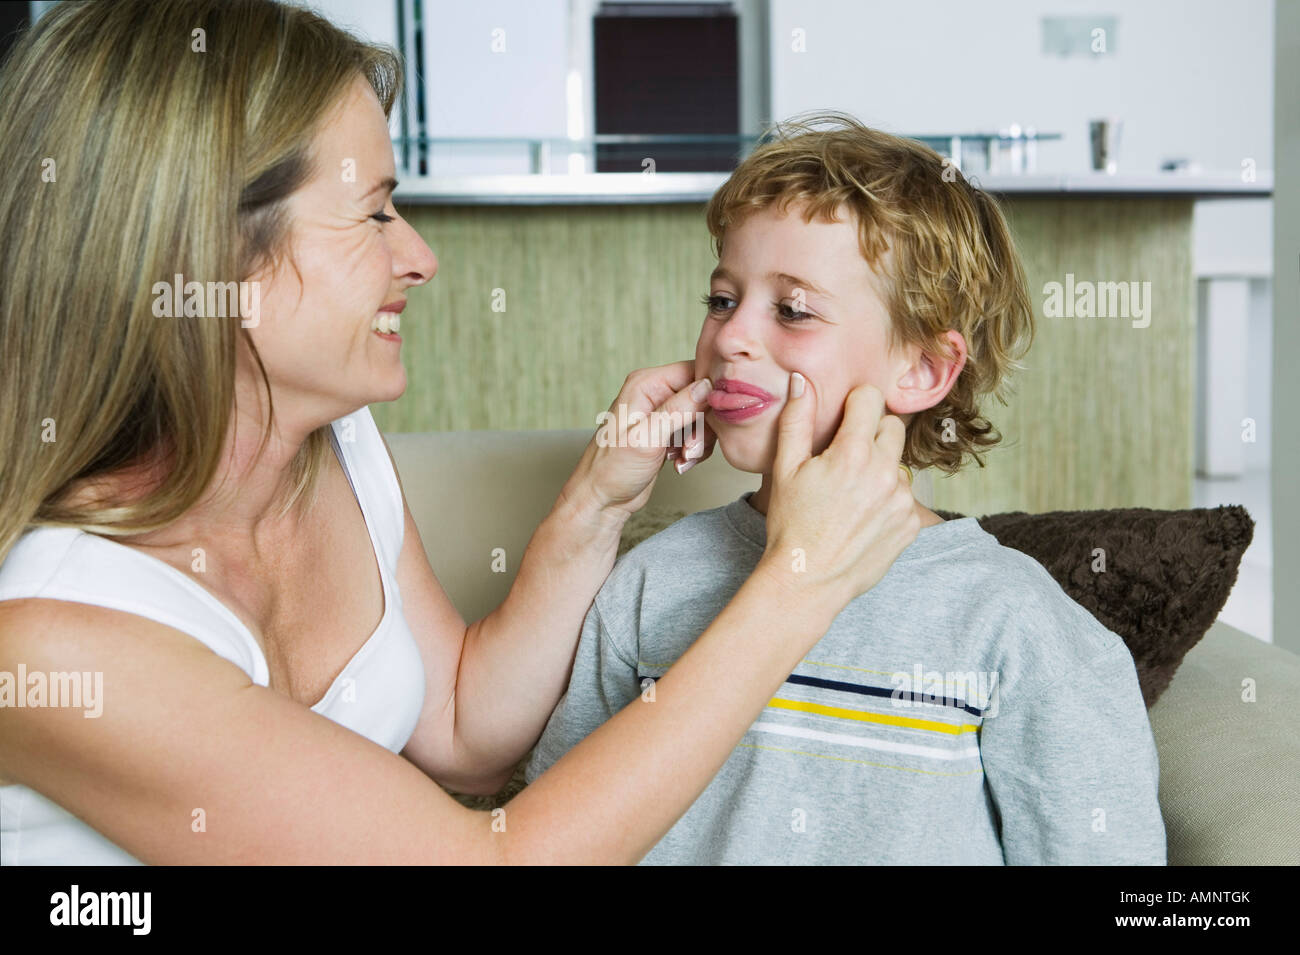 Pinching Cheek Hi Res Stock Photography And Images Alamy